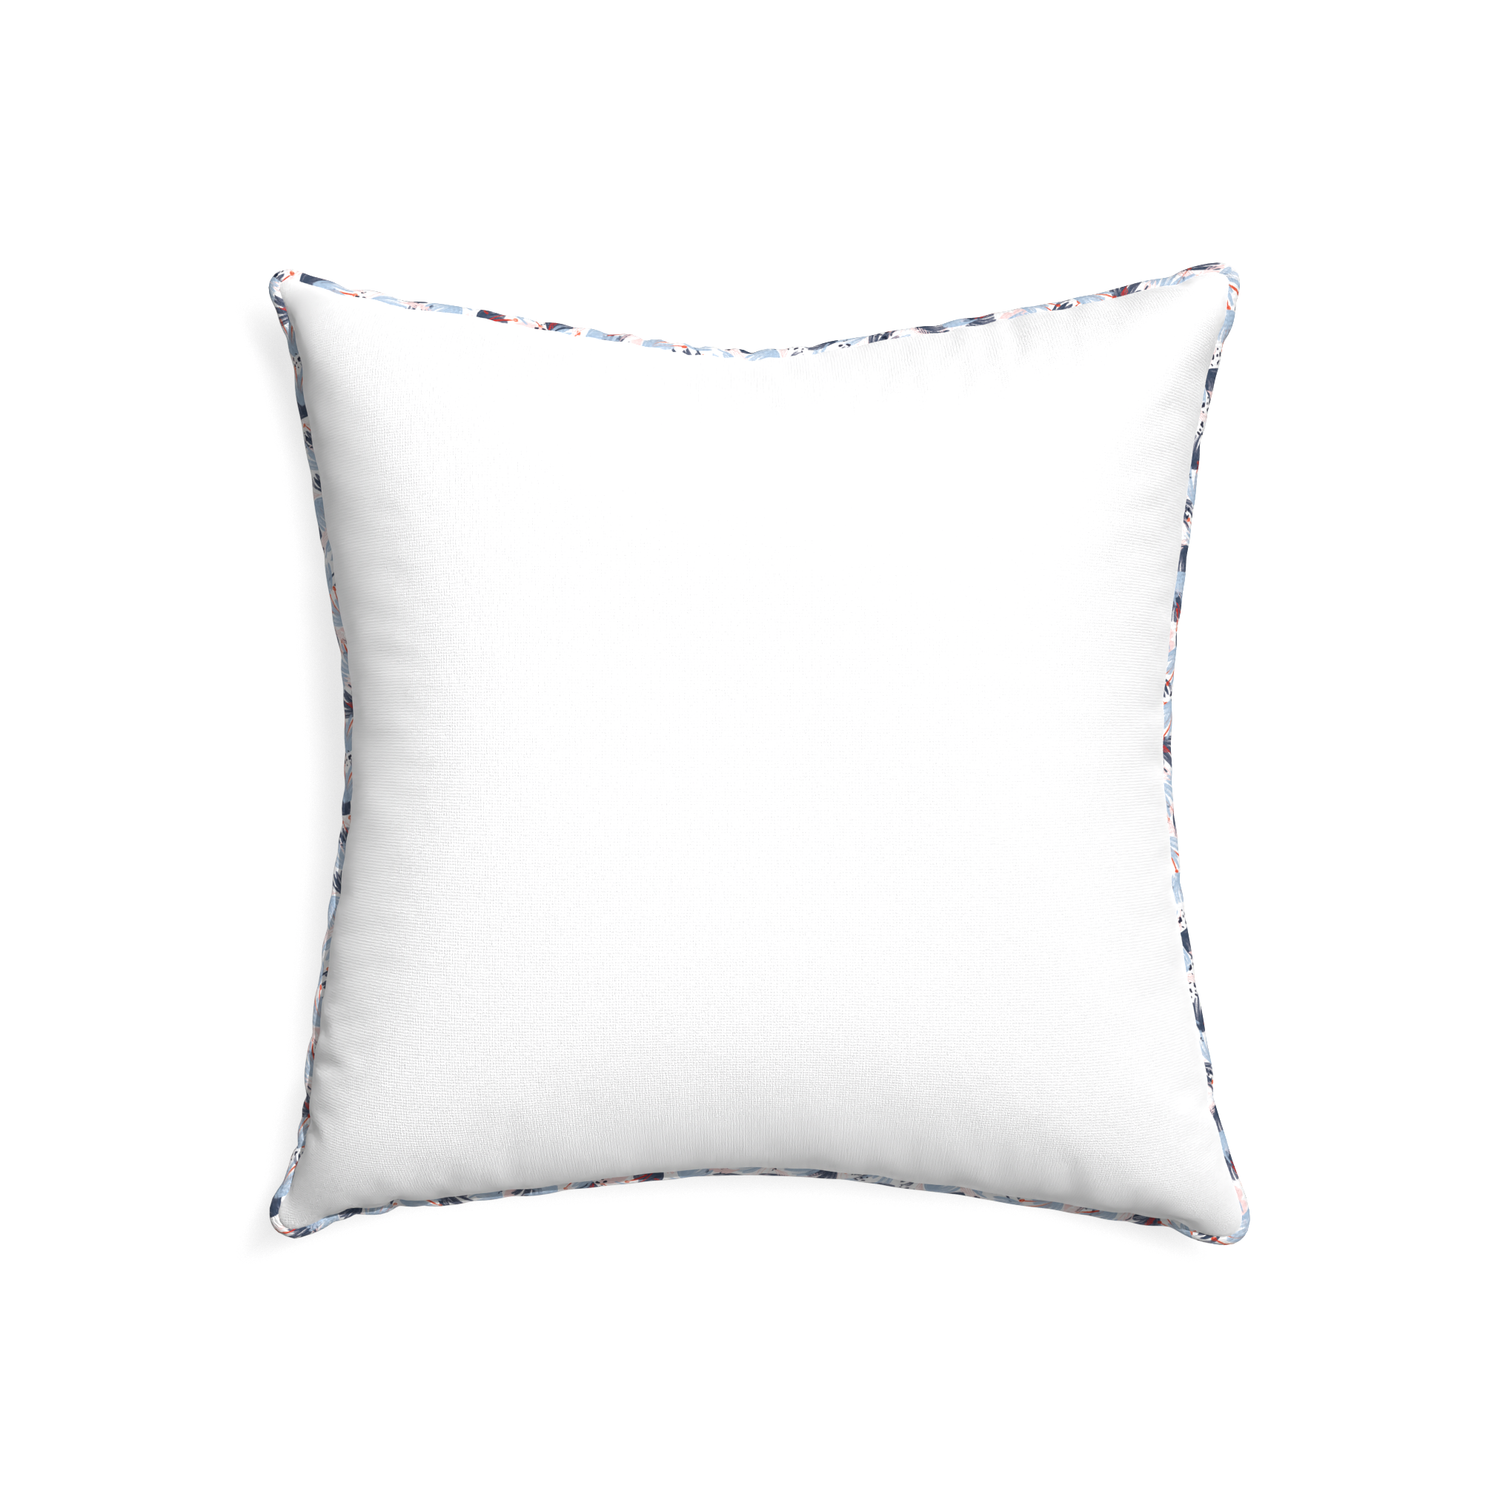 22-square snow custom white cottonpillow with e piping on white background